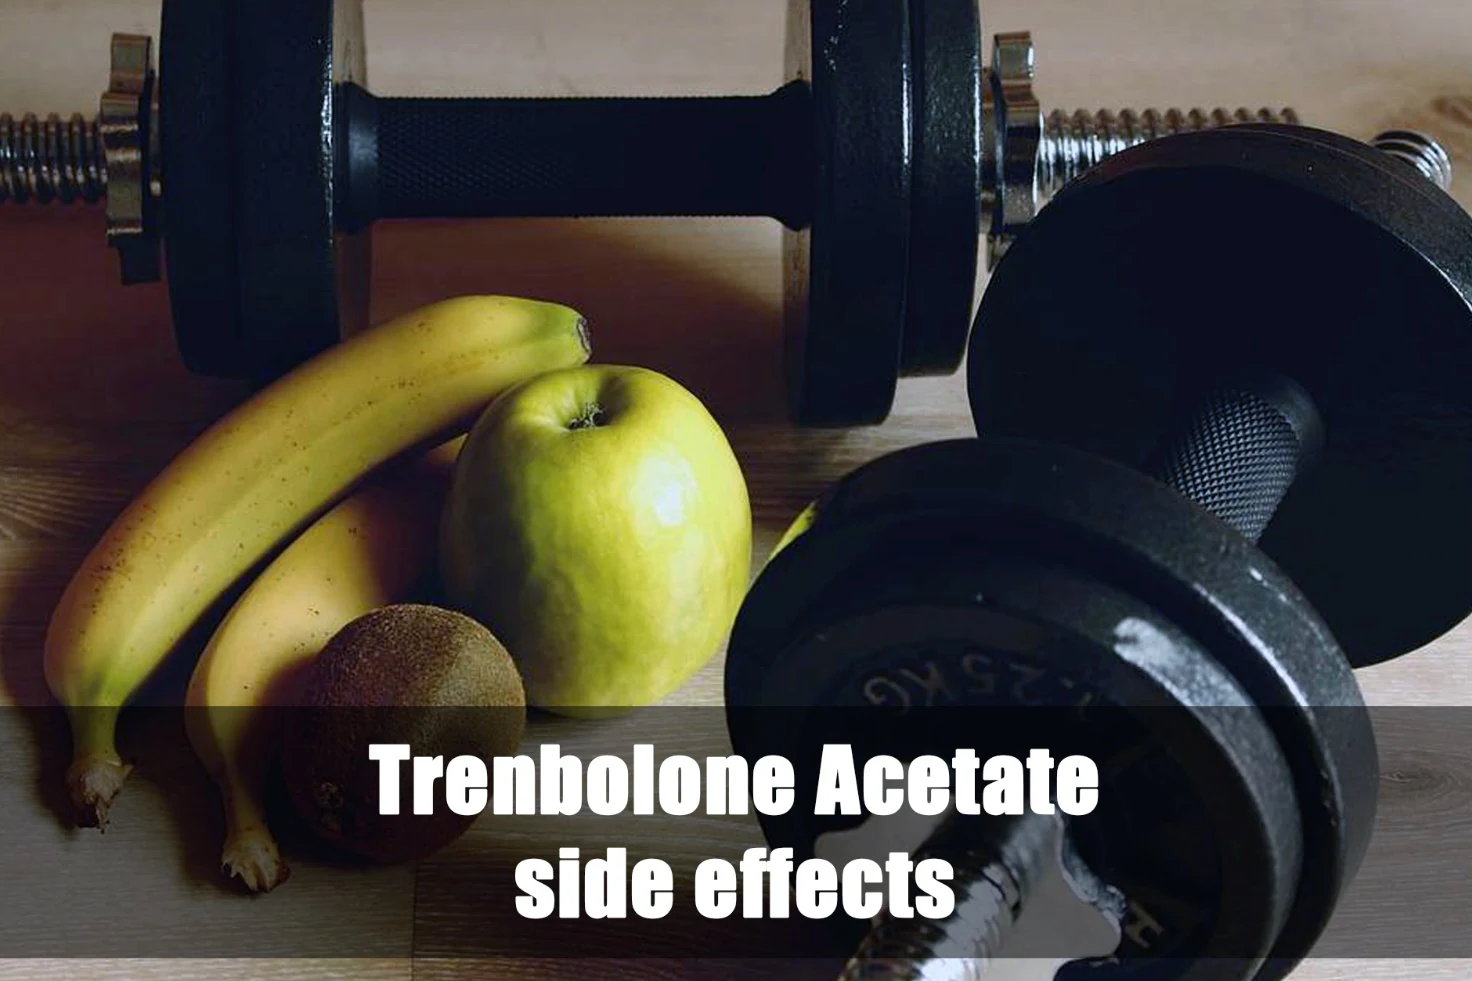 Trenbolone Acetate side effects